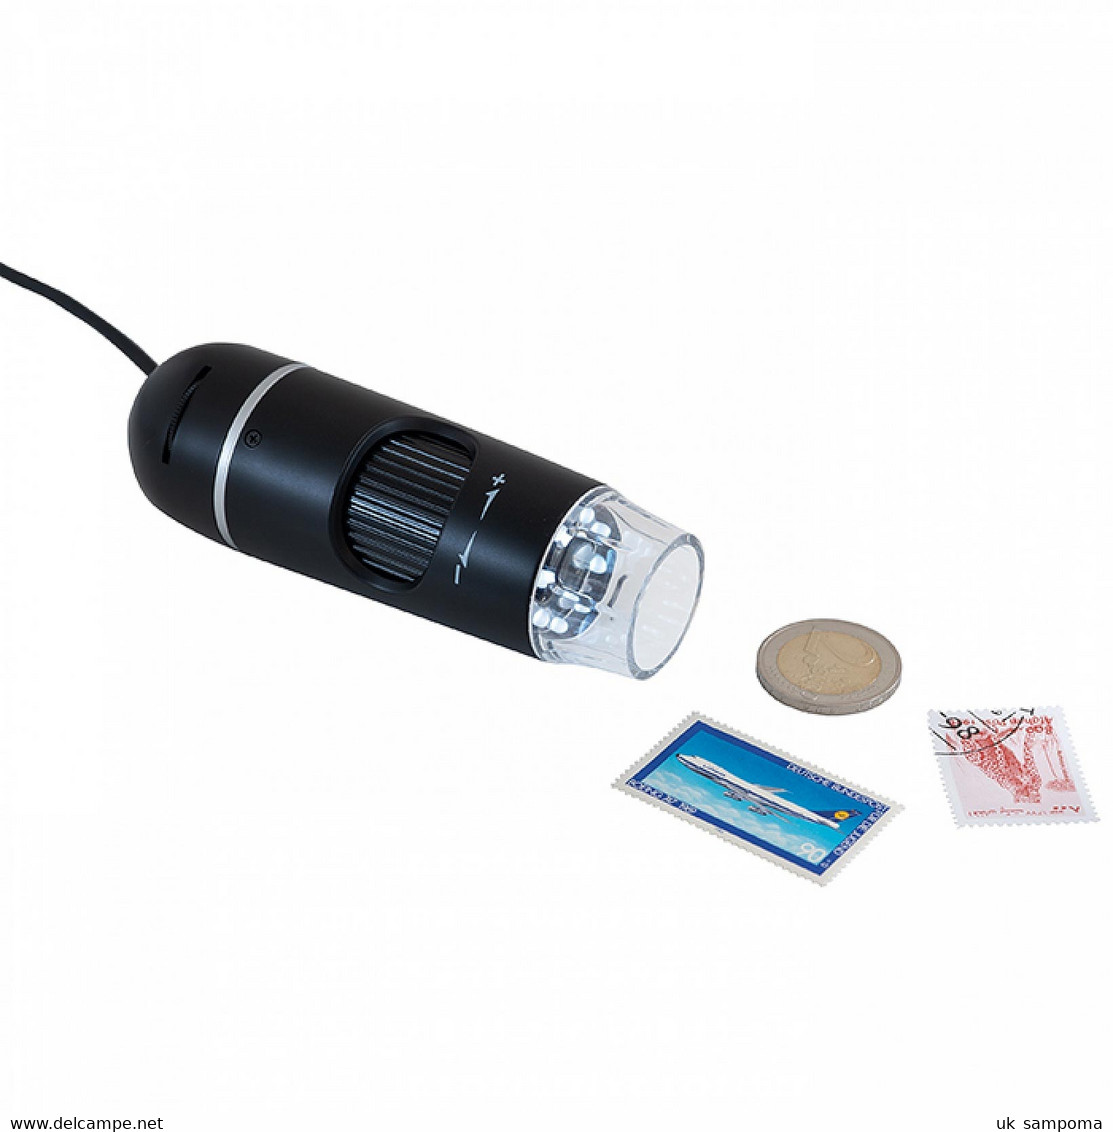 USB Digital Microscope DM6, Features A 10x To 300x Magnification - Pinces, Loupes Et Microscopes